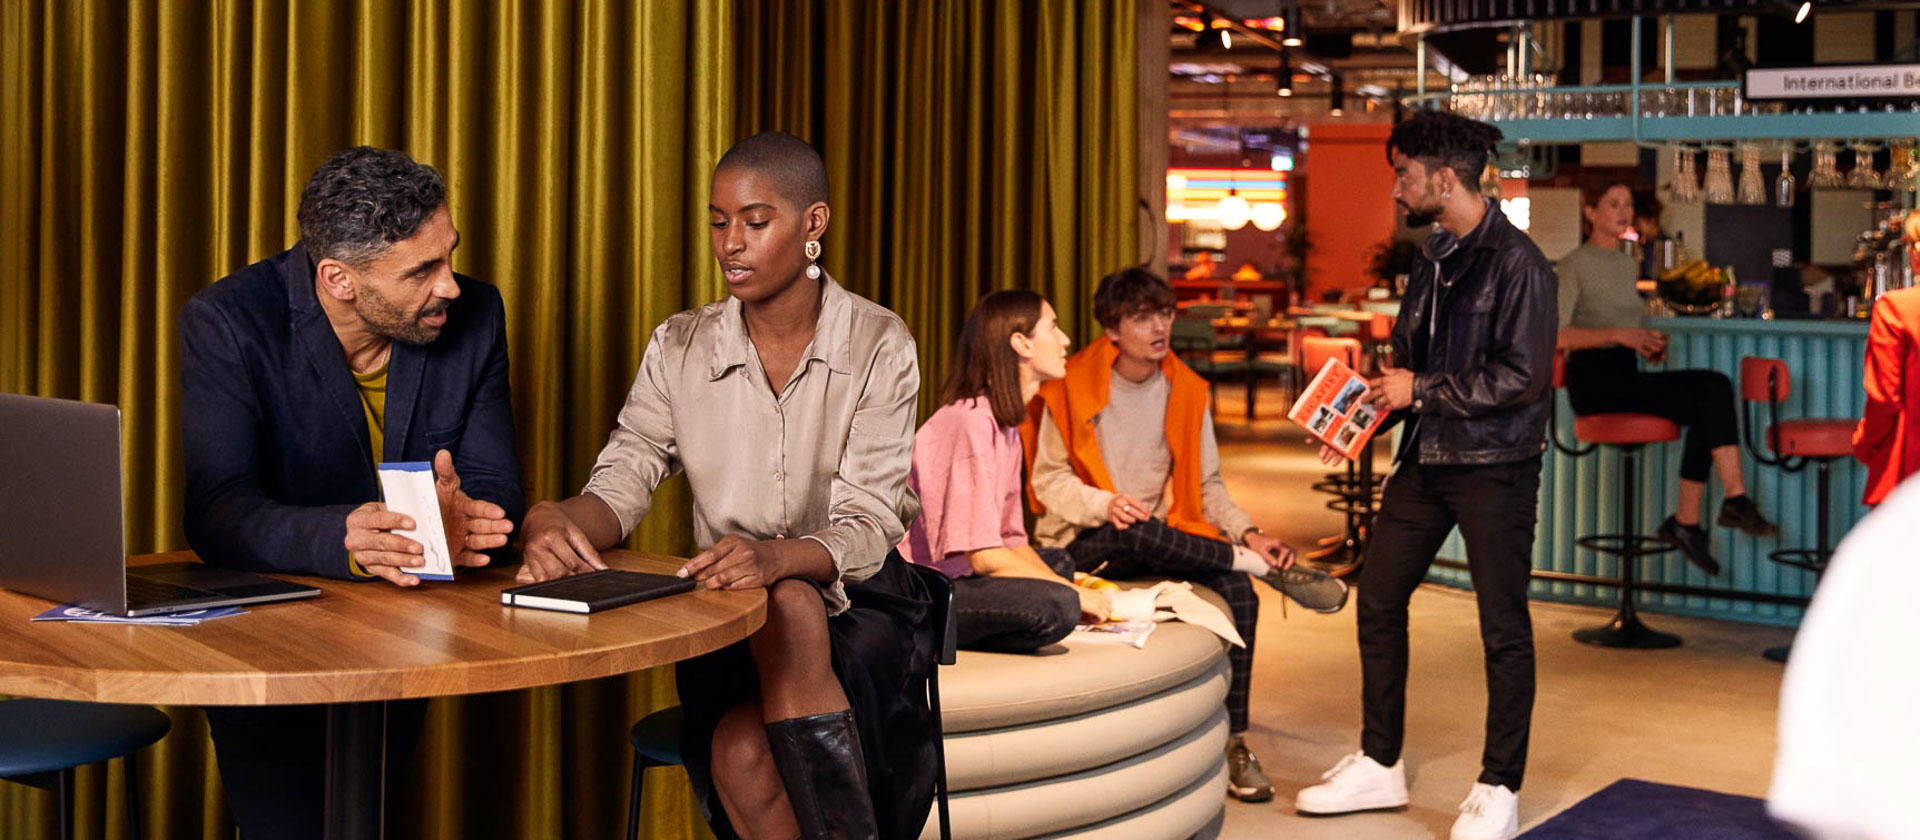 Group sits on bar table near the BedTalks event space at The Student Hotel Berlin